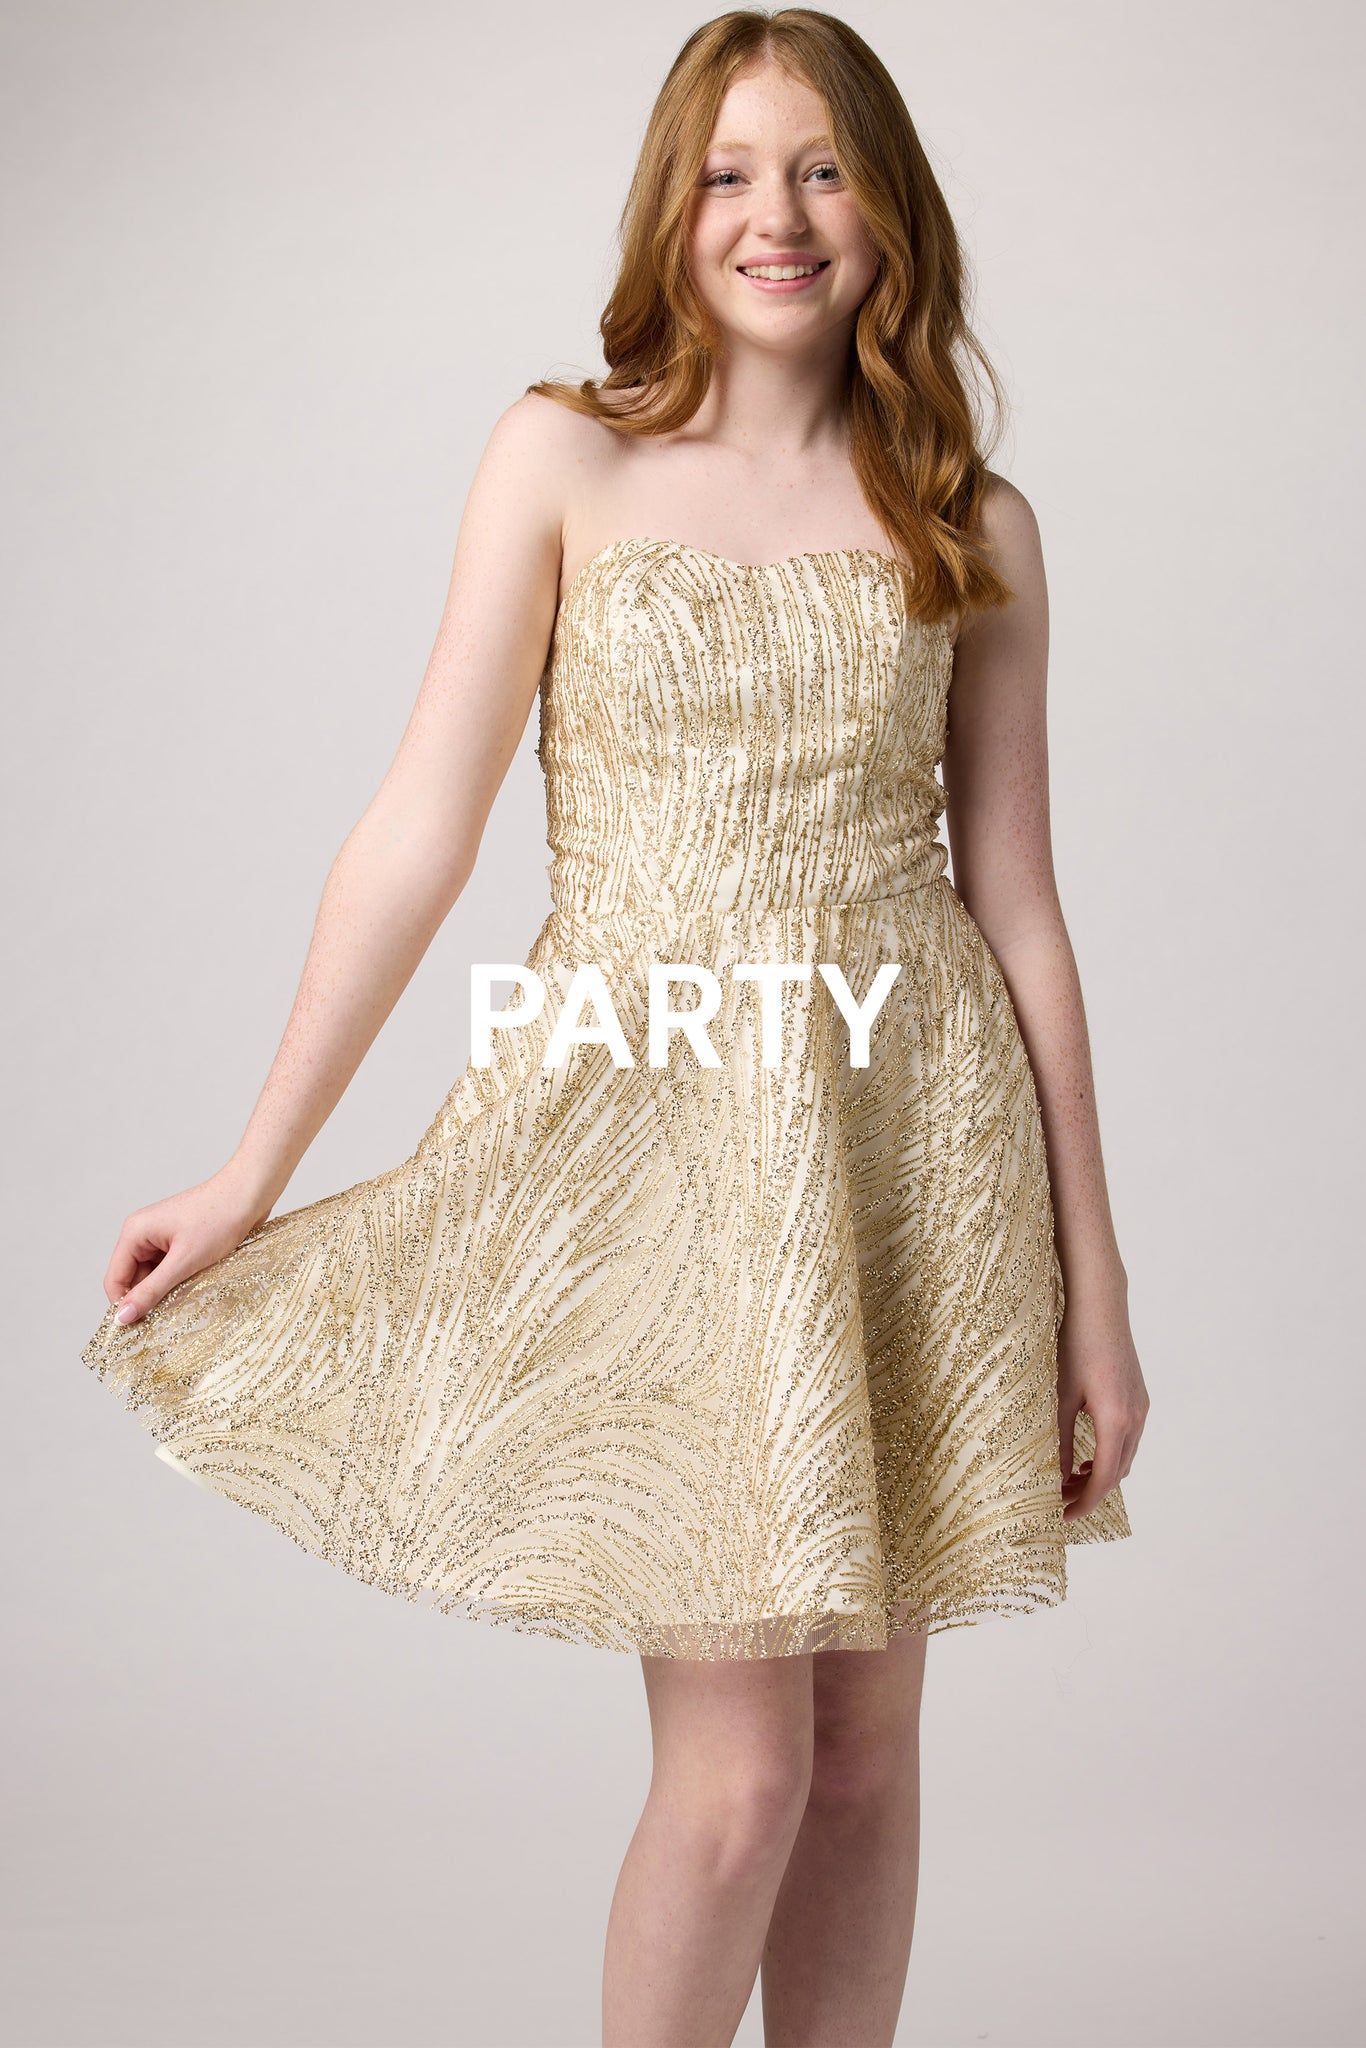 Red head in a gold sequin dress.